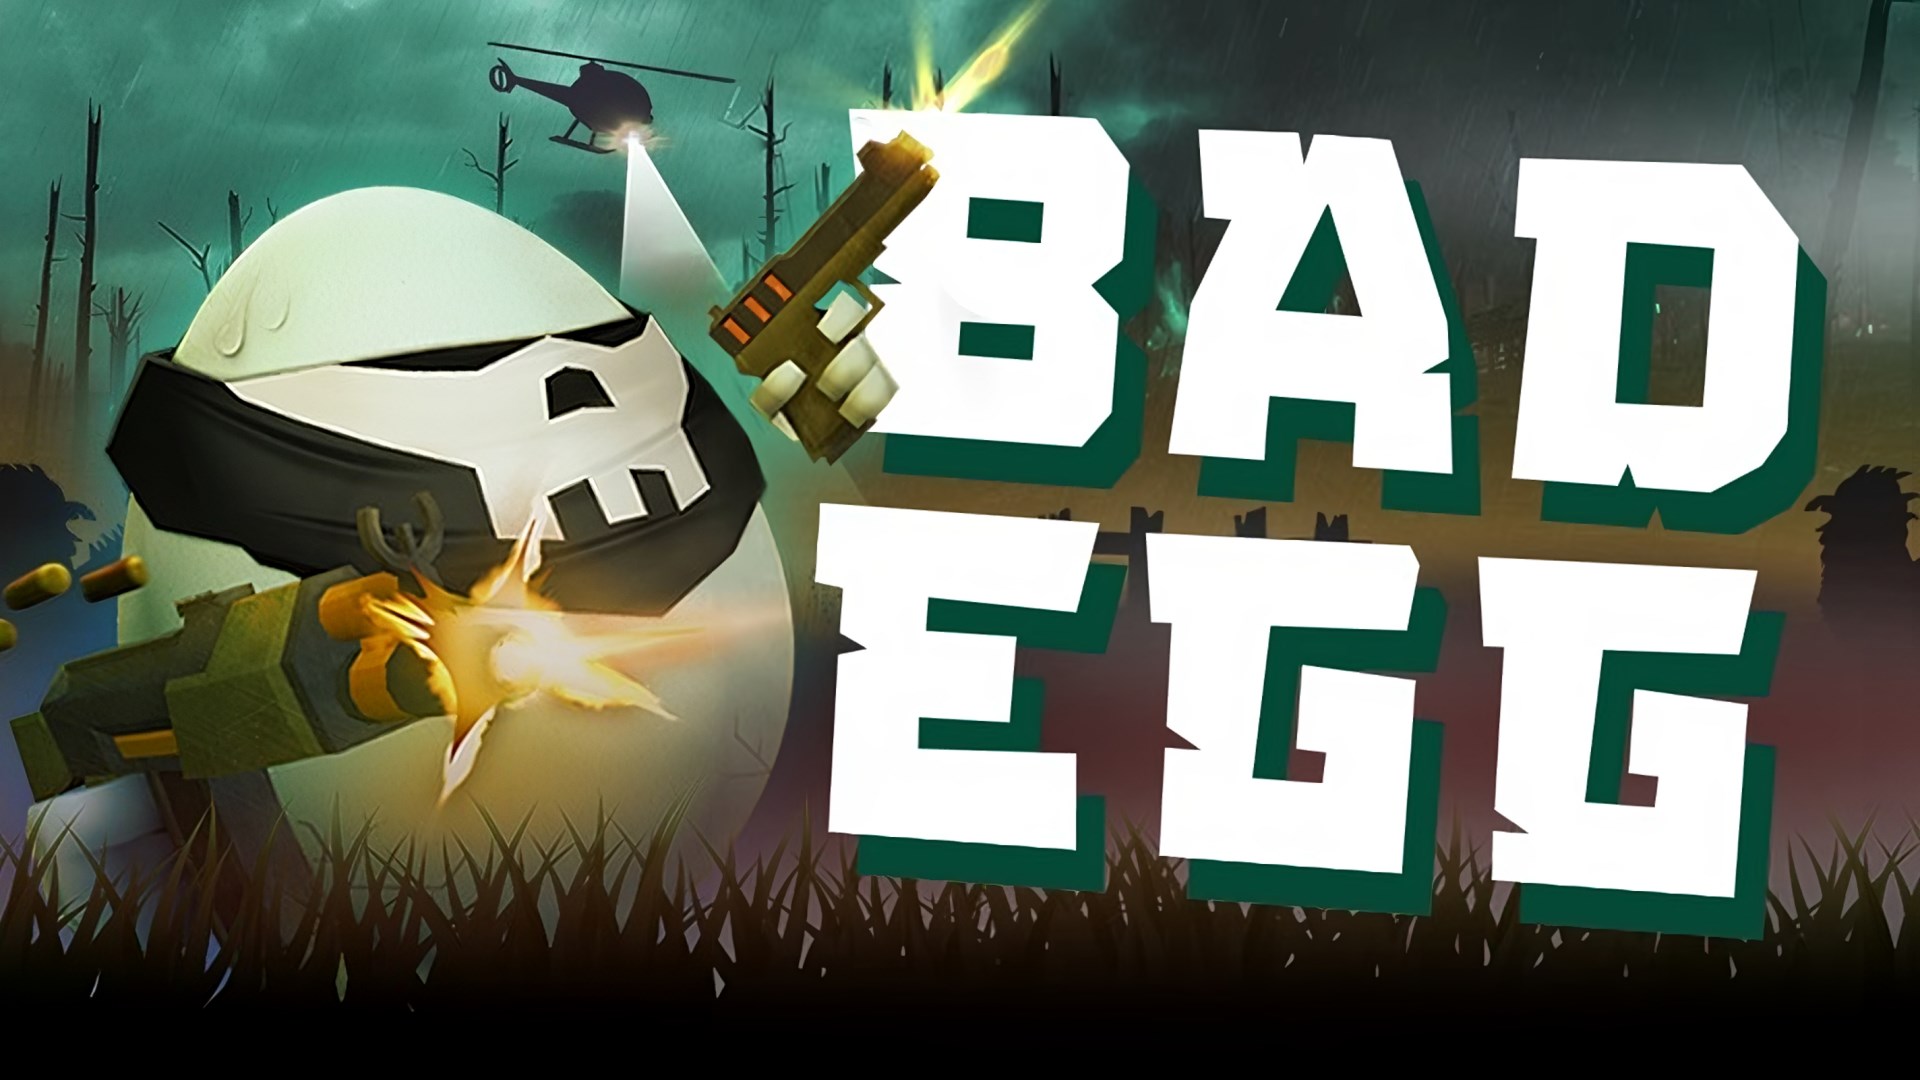 PLAYING the NEW (BAD EGG.IO) GAME